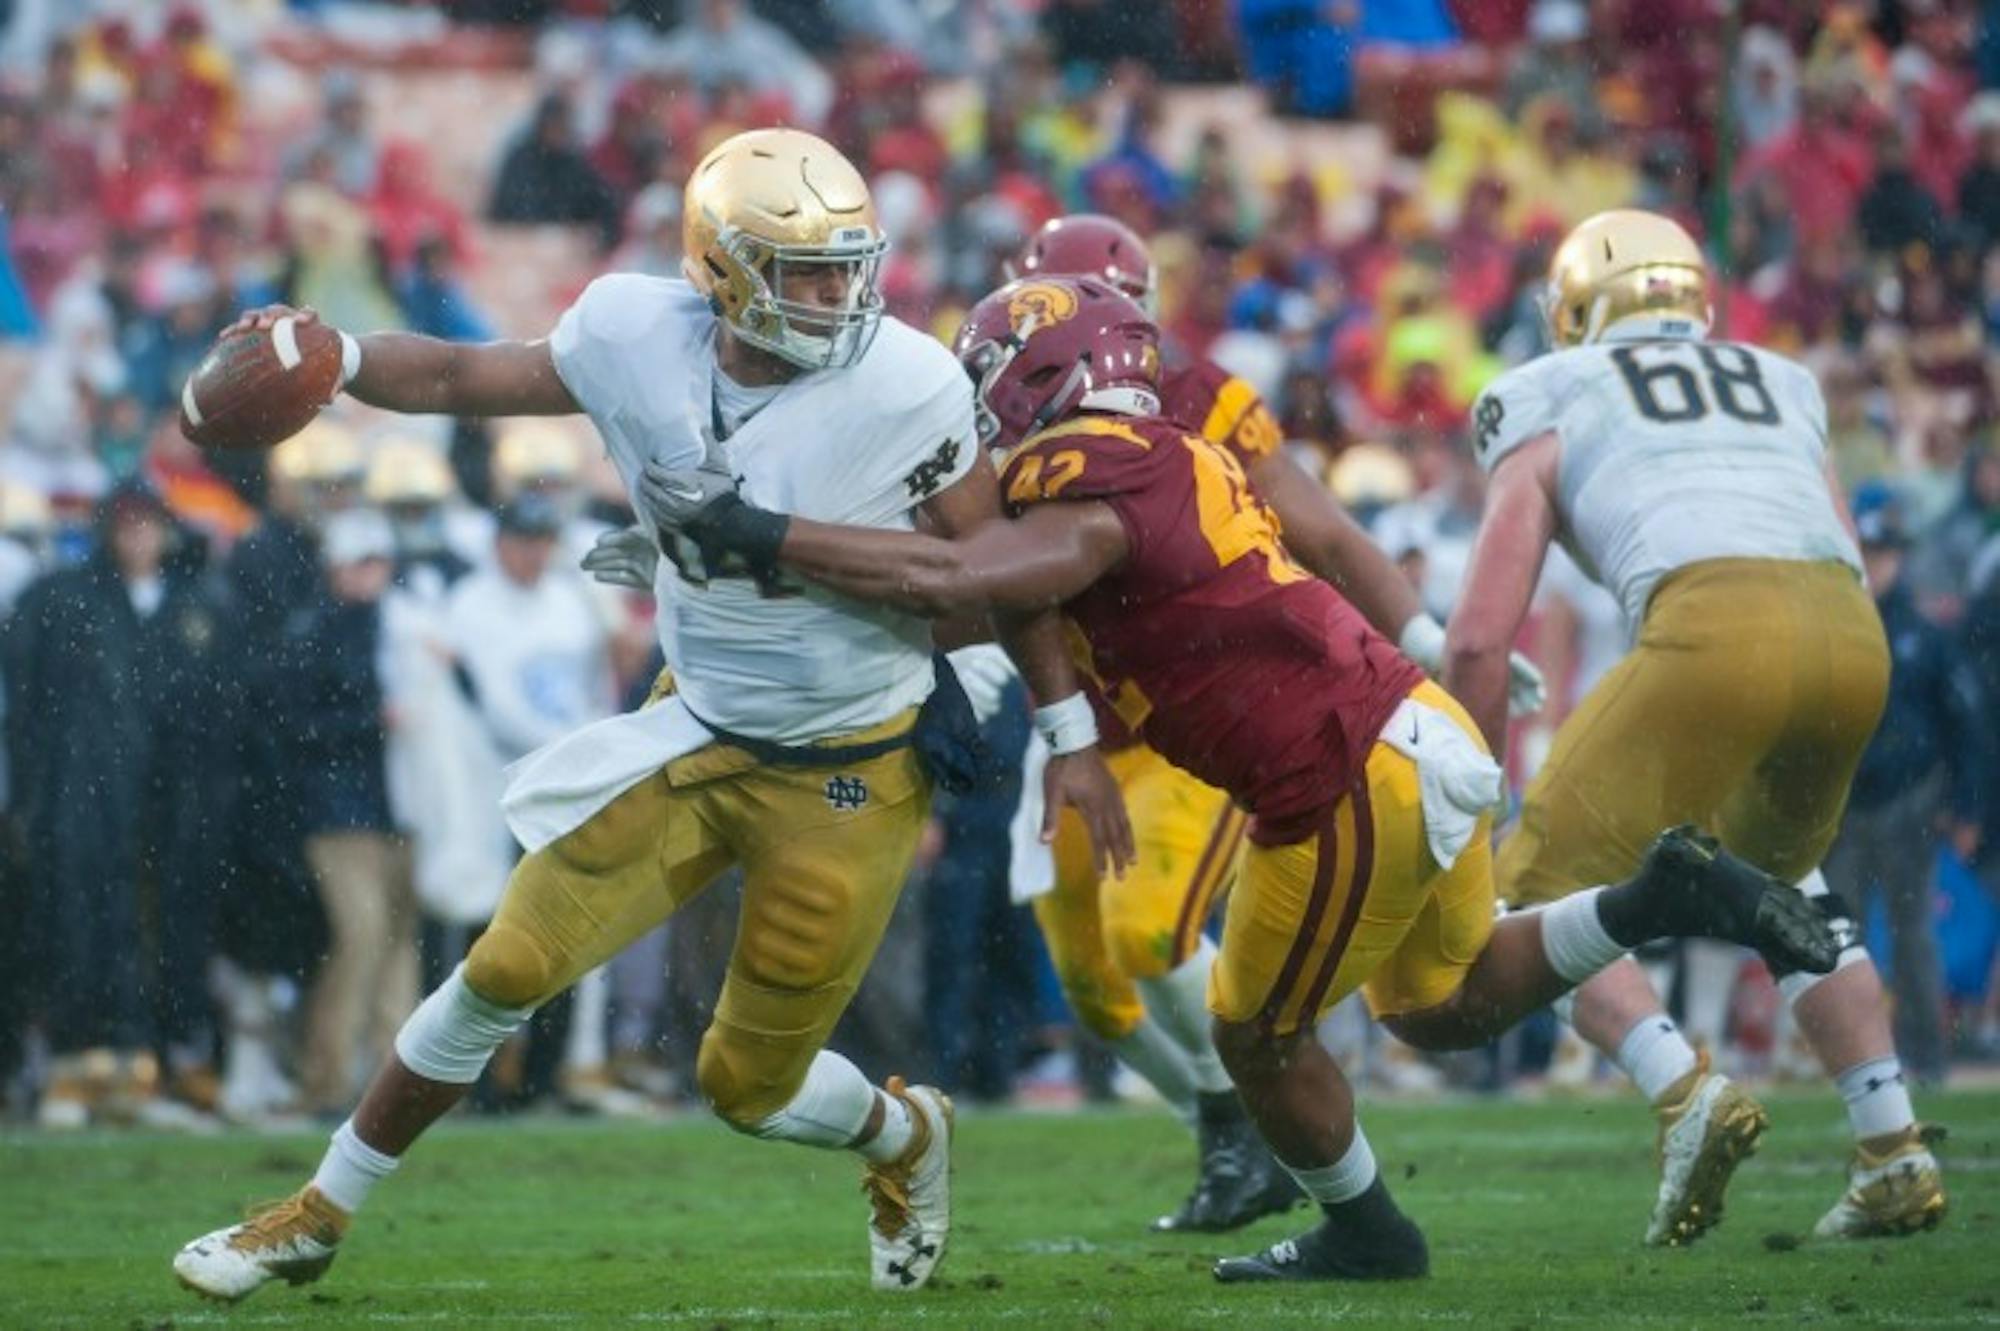 Irish junior quarterback DeShone Kizer attempts to elude a pass rusher during Notre Dame's 45-27 loss Saturday to USC.